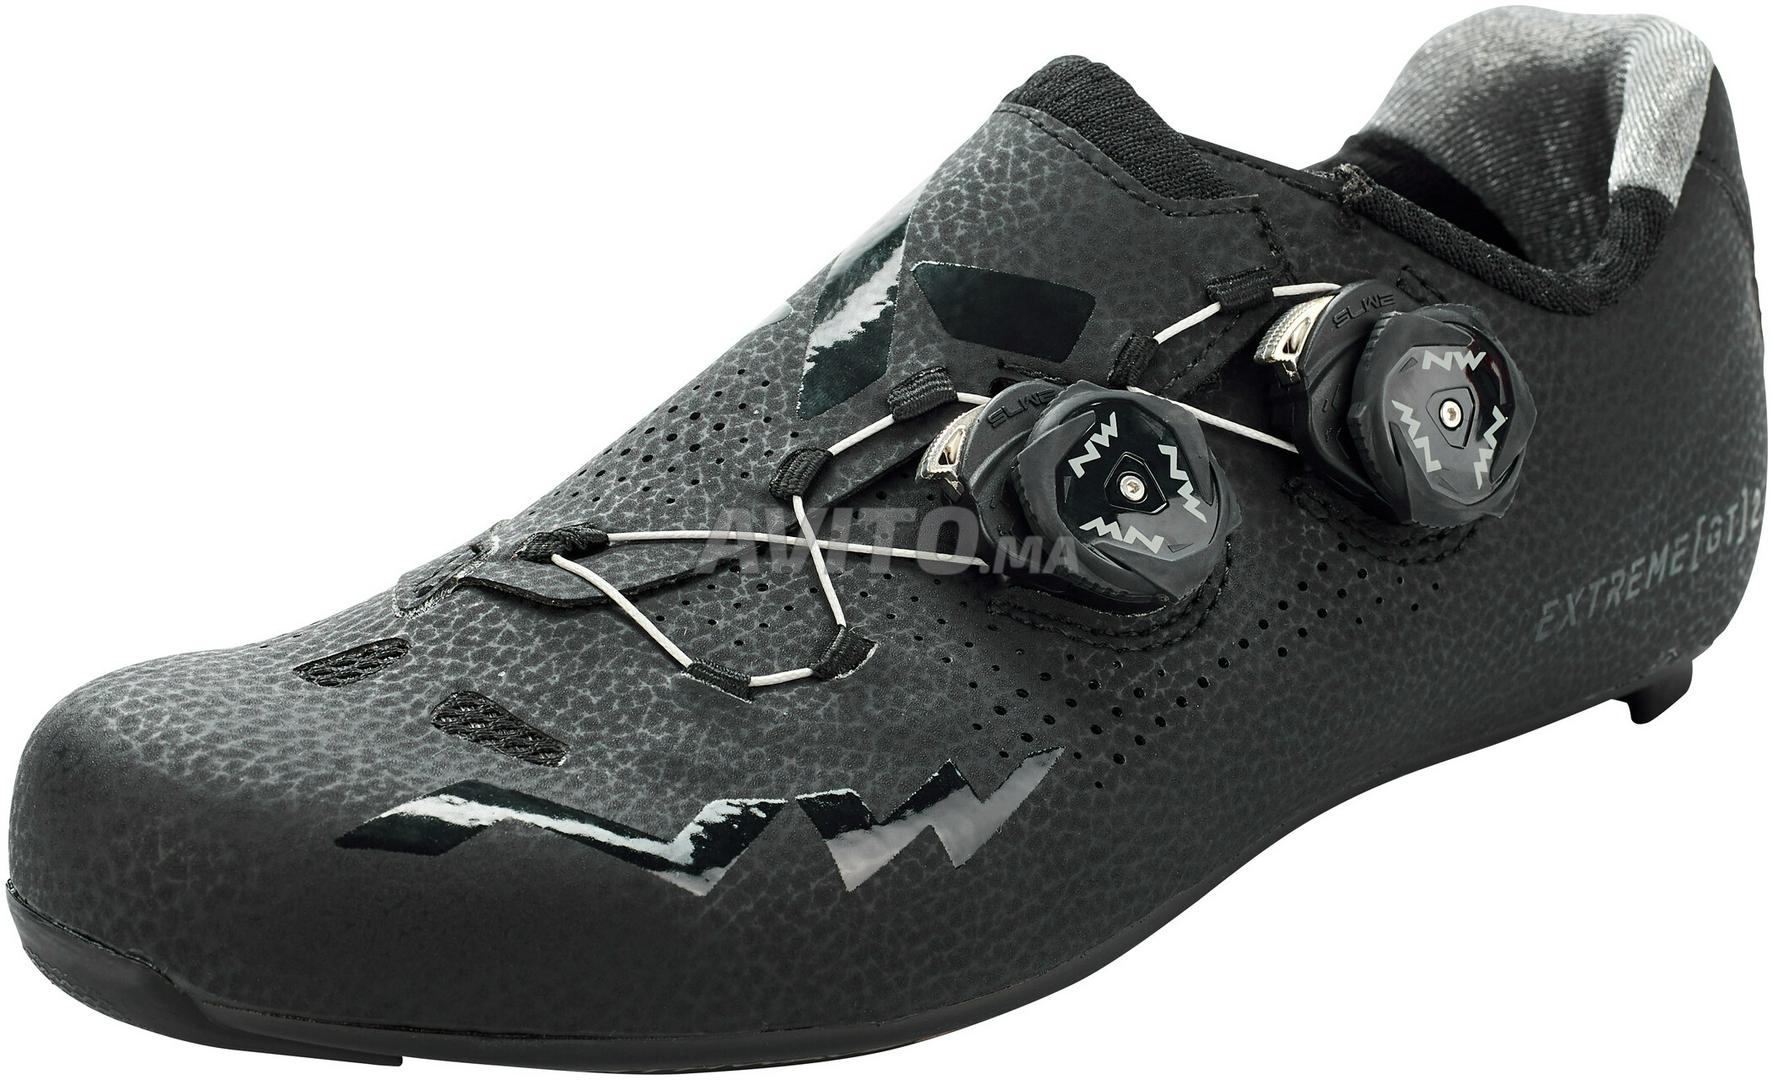 Chaussures Carbone Vélo Route Northwave Extreme 45 - 3